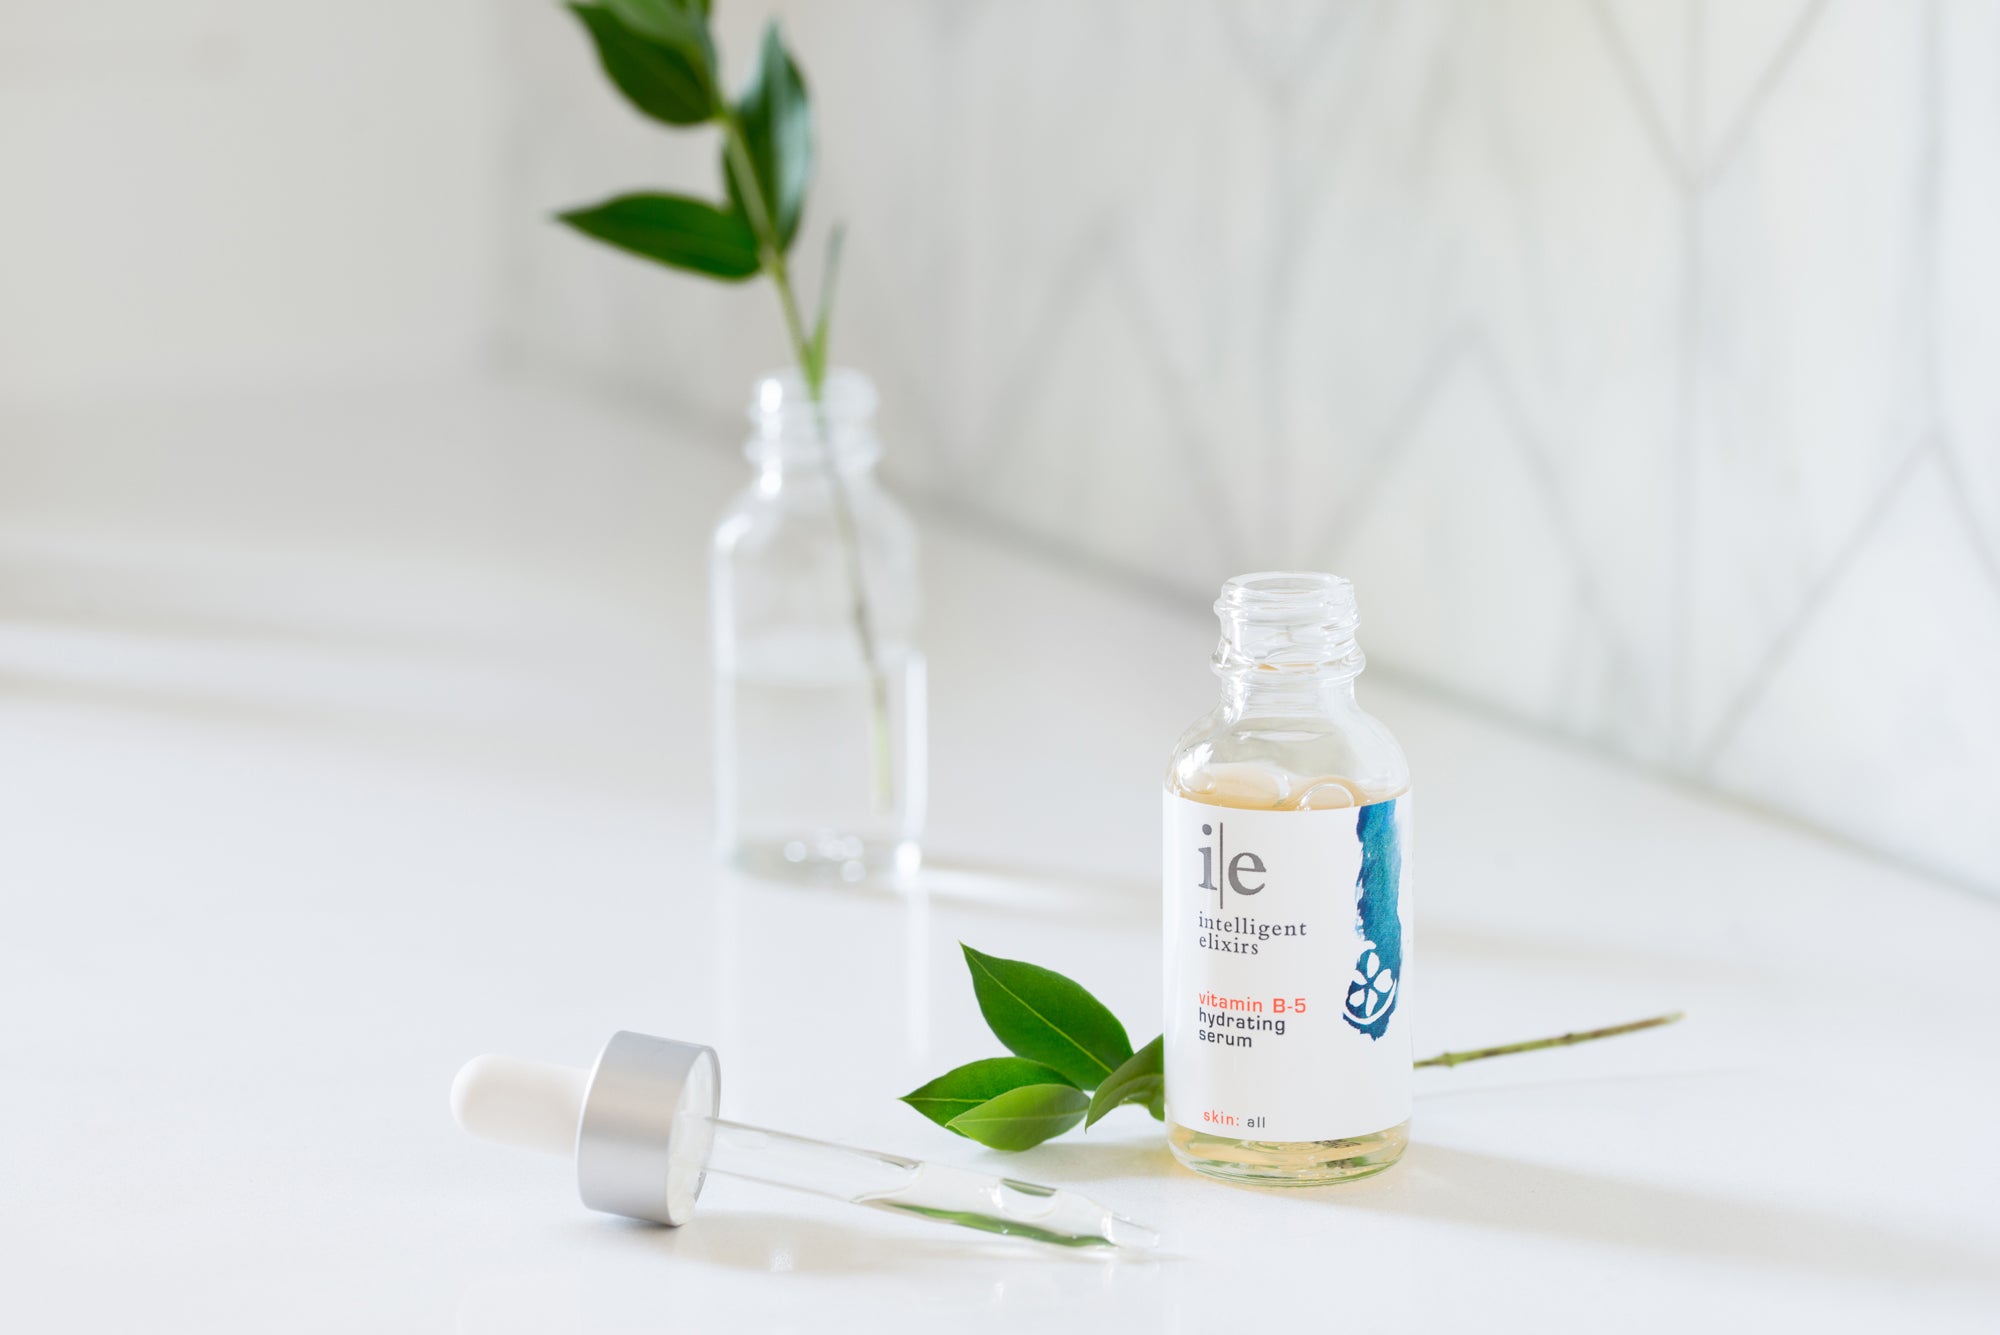 Vitamin B-5 Skincare Serum sitting on a counter with a plant